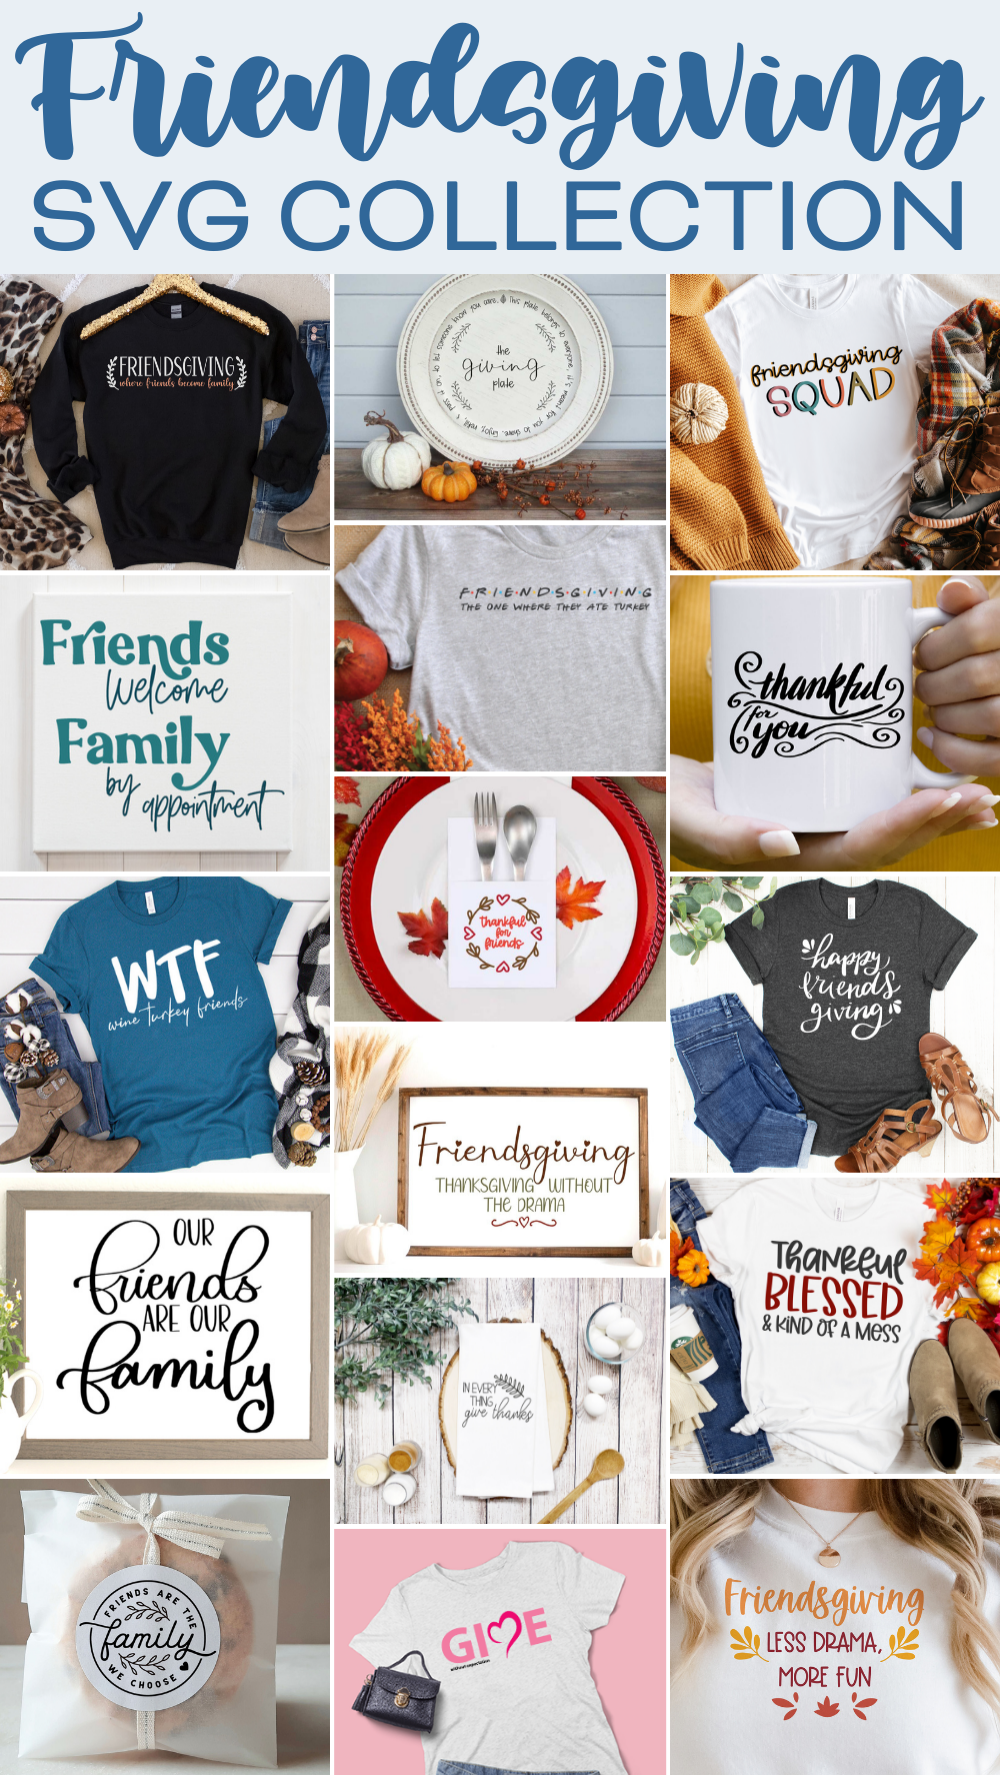 Friendsgiving SVG Collection